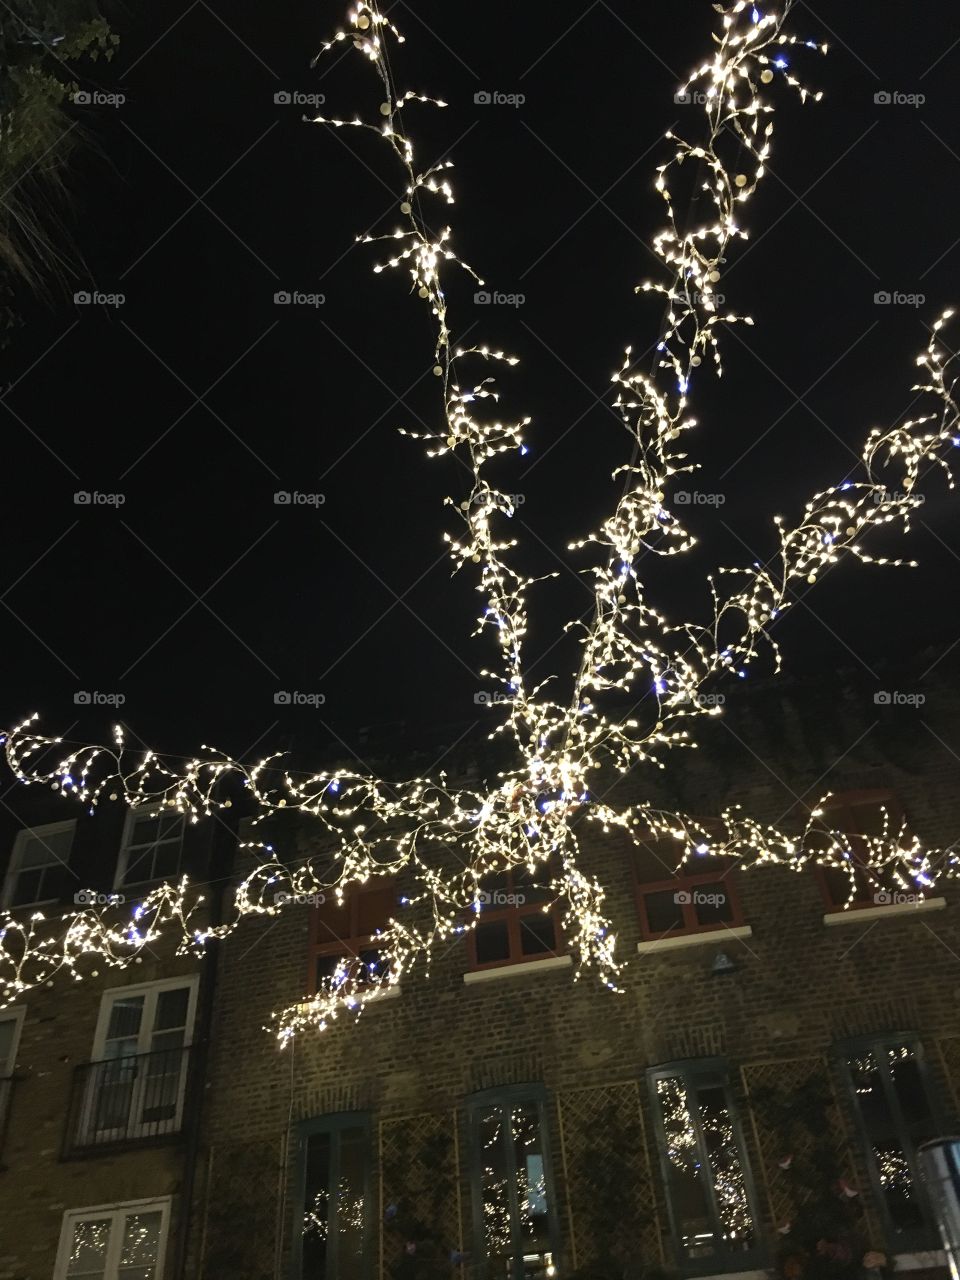 An example of the gorgeous Christmas lights over a London street